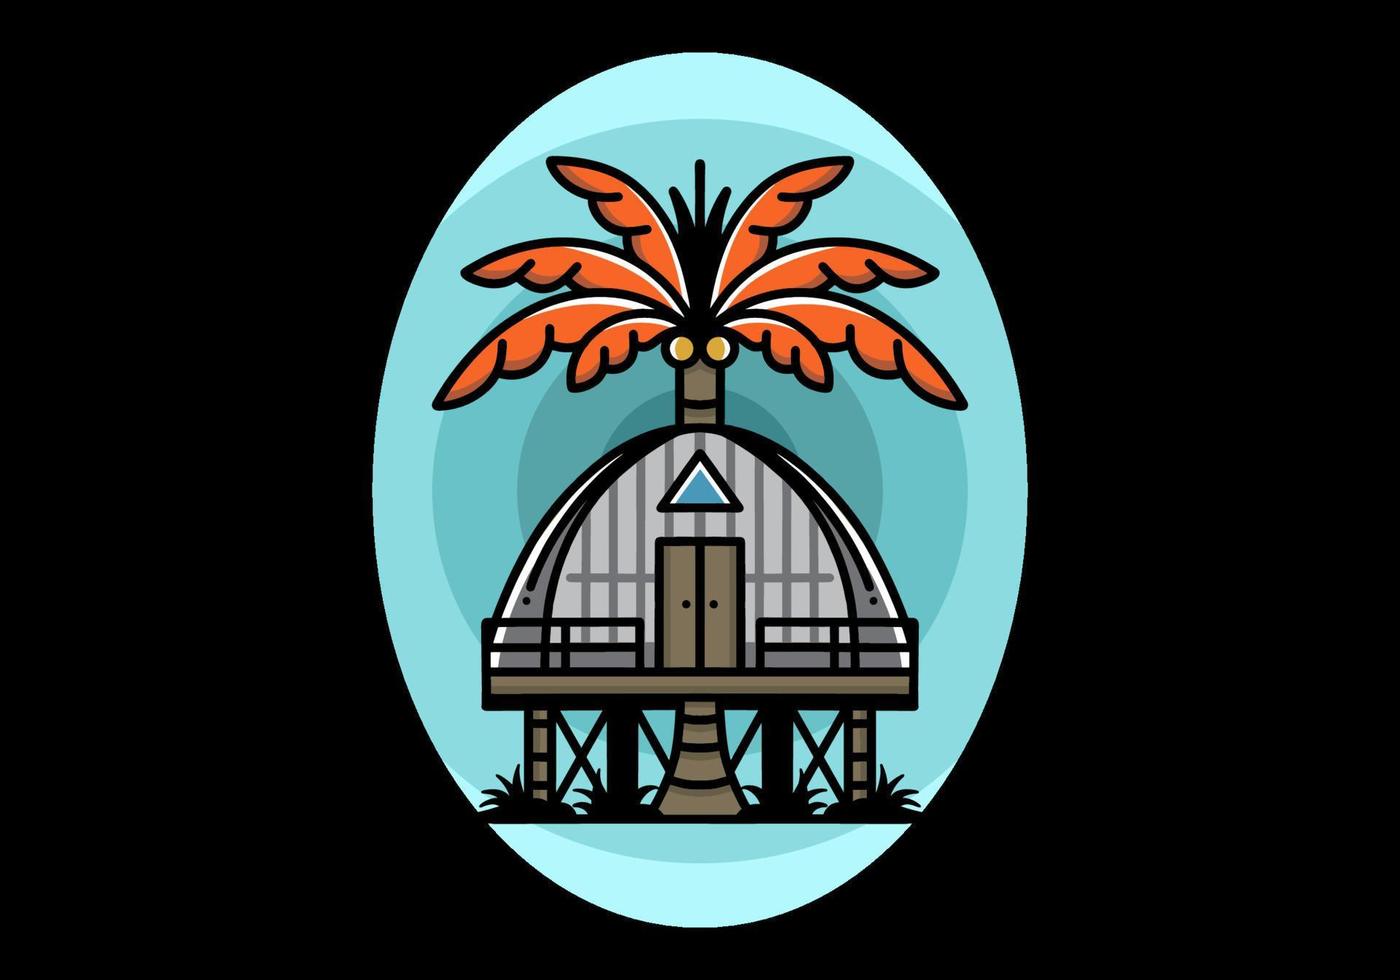 Wooden house with big coconut tree badge design vector